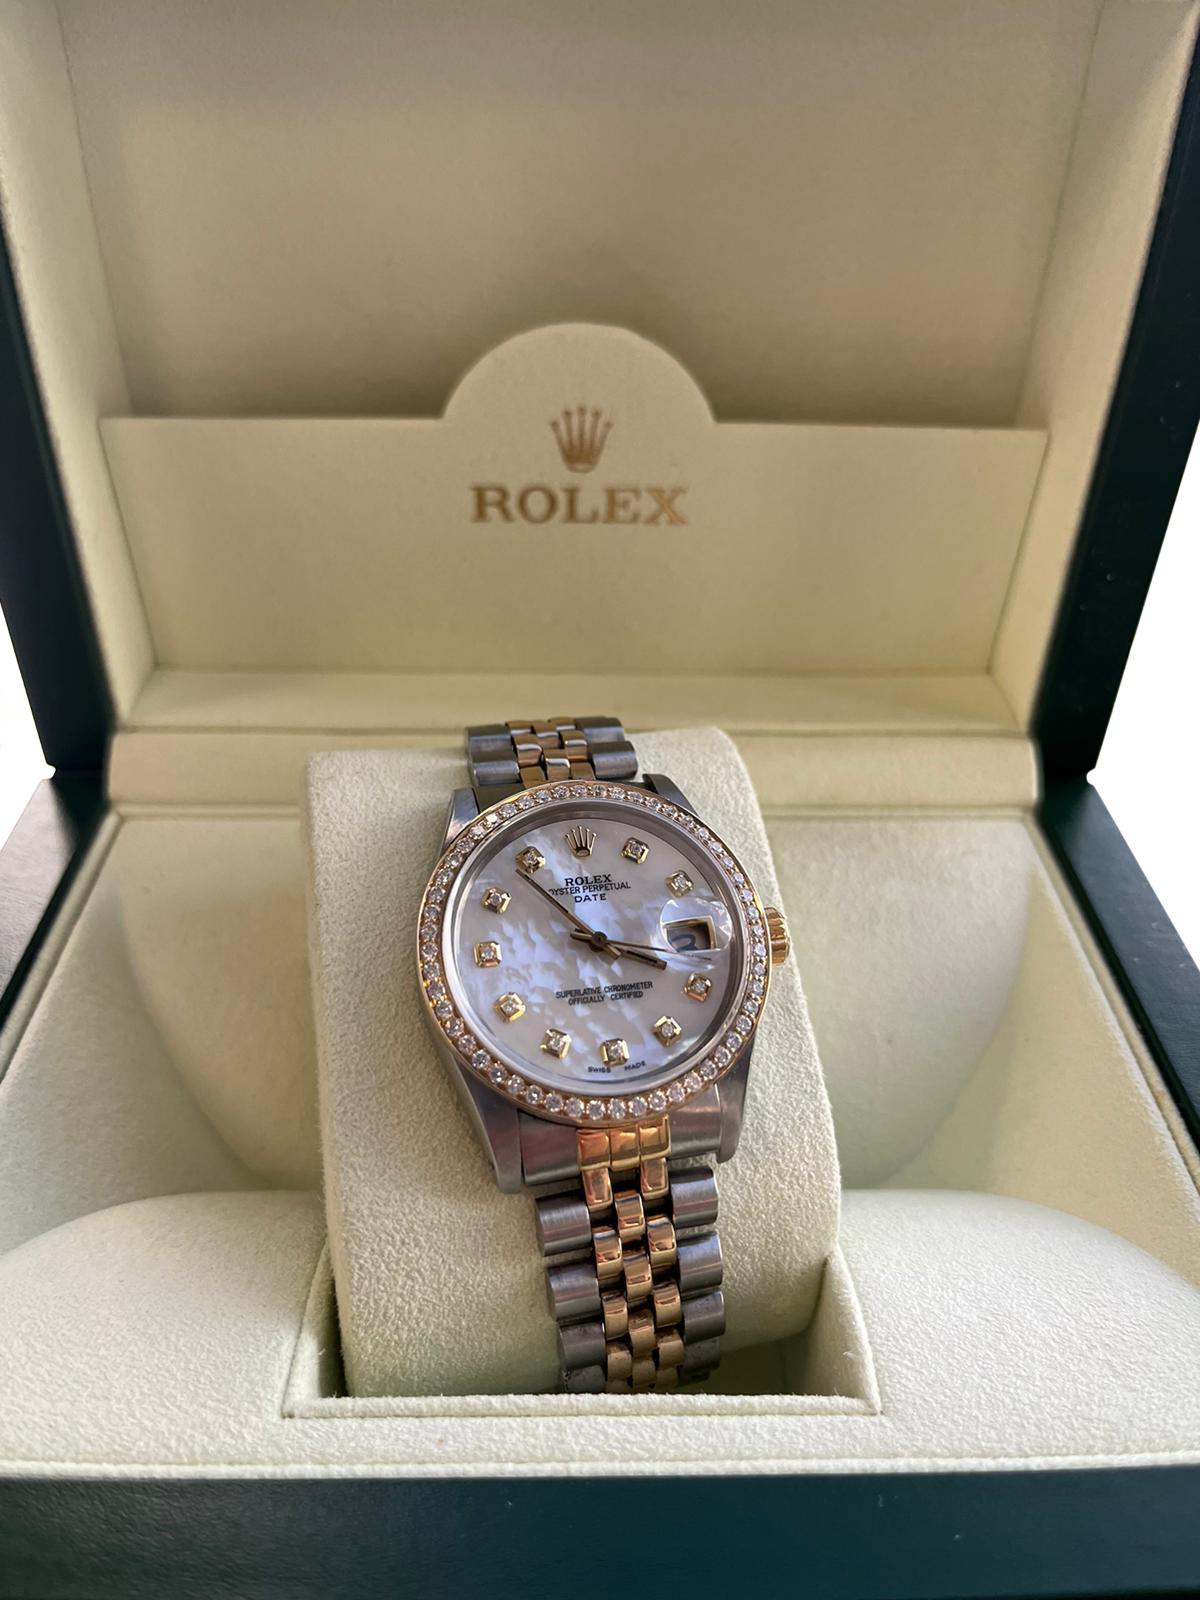 Rolex Oyster Perpetual Date 34mm Two Tone MOP Diamond Dial Bezel Watch 15053 In Good Condition For Sale In Aventura, FL